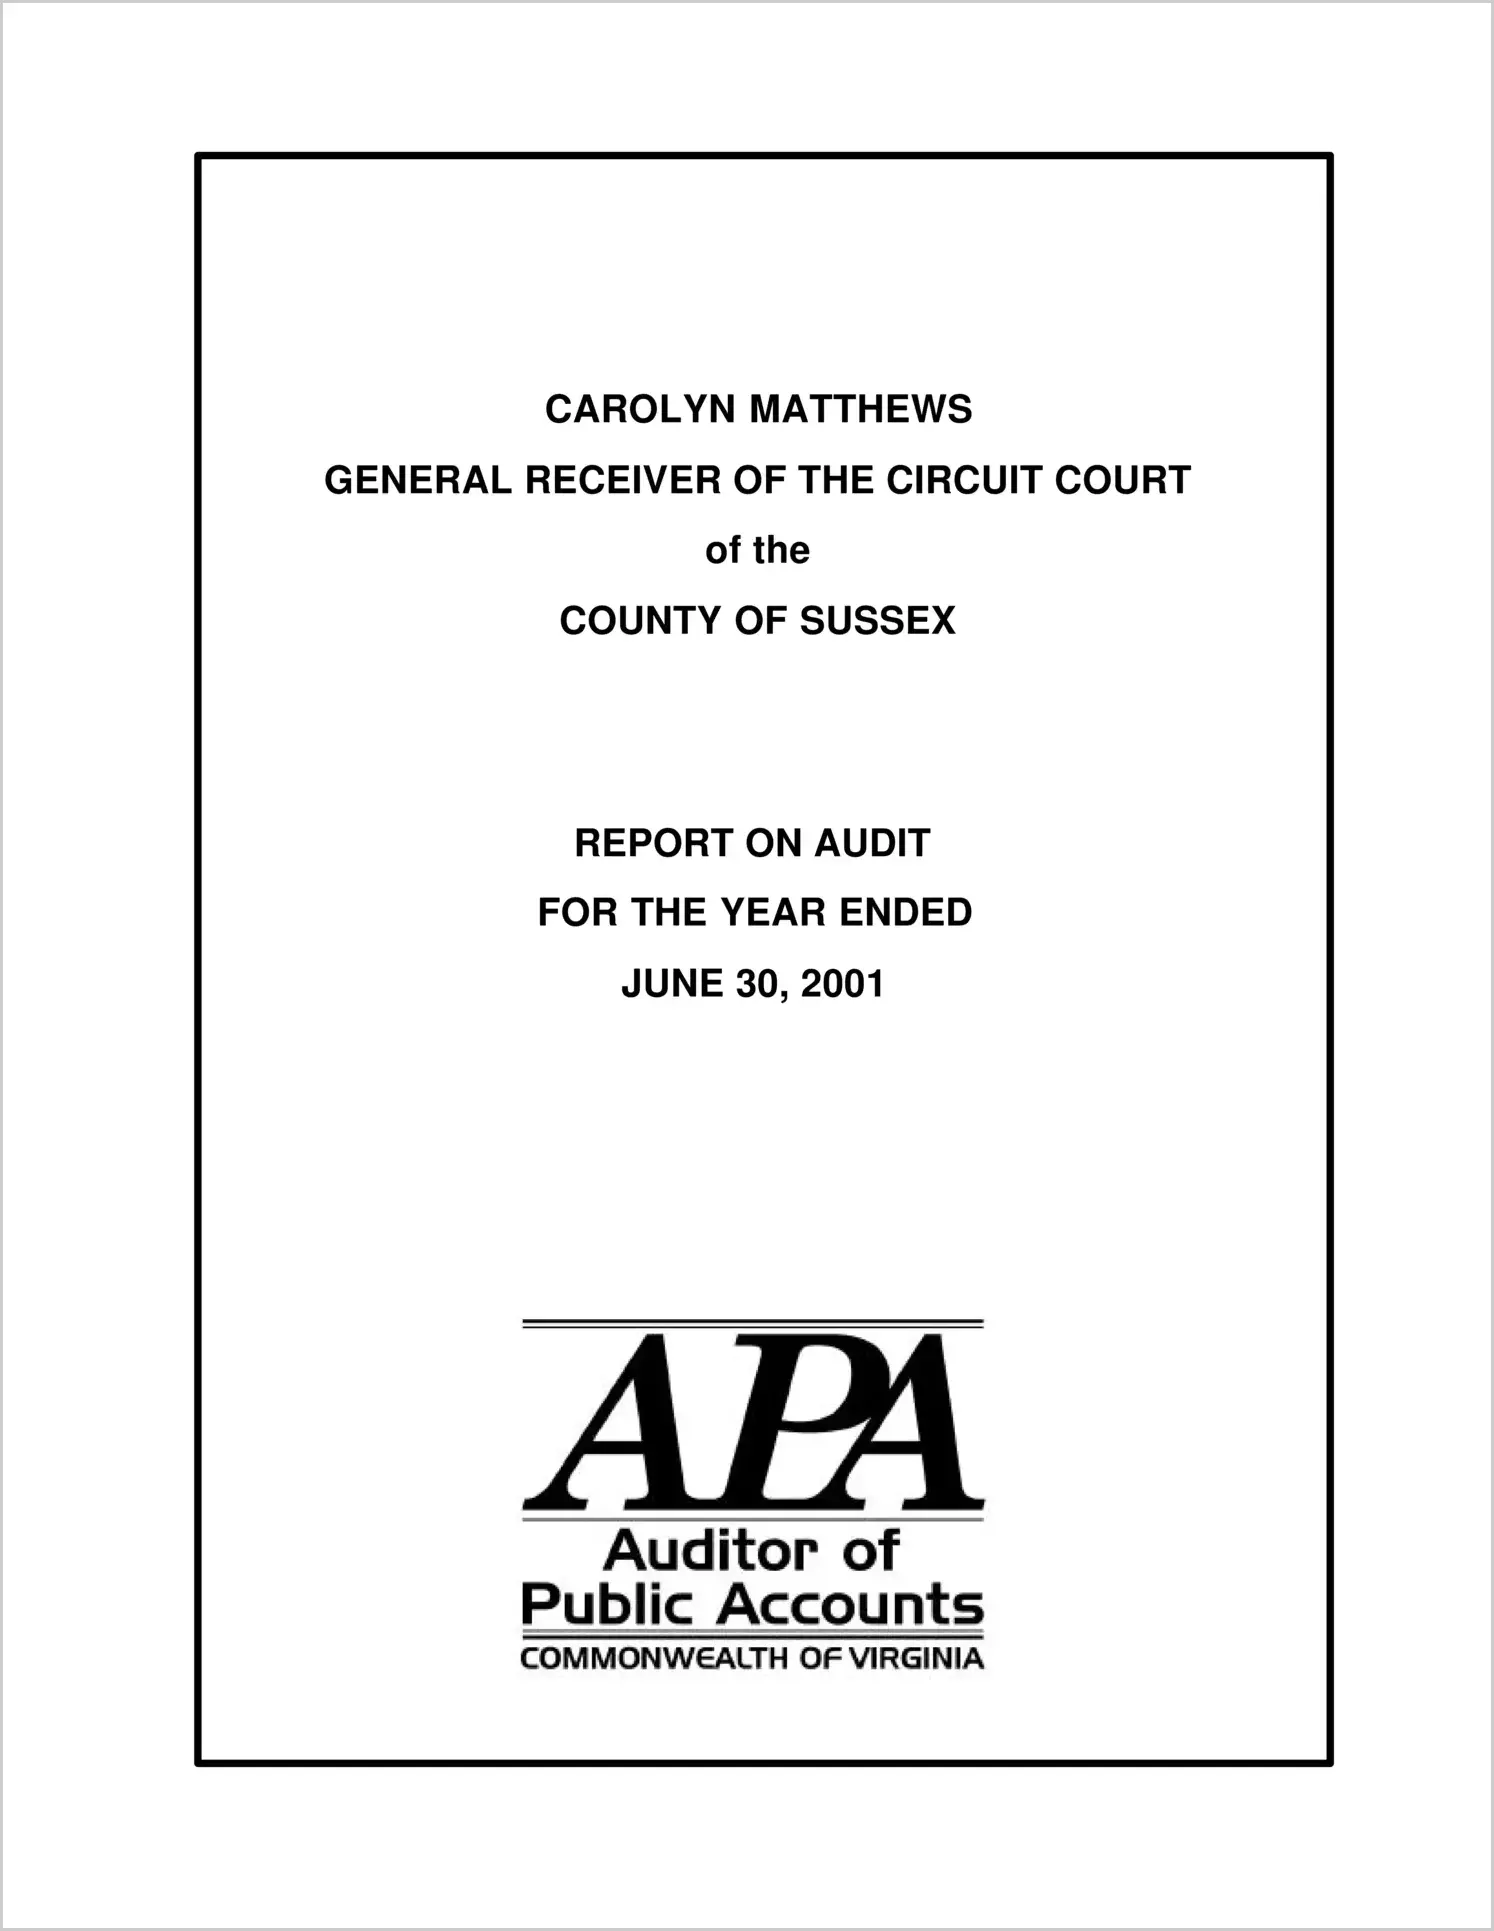 General Receiver of the Circuit Court of the County of Sussex for the year ended June 30, 2001